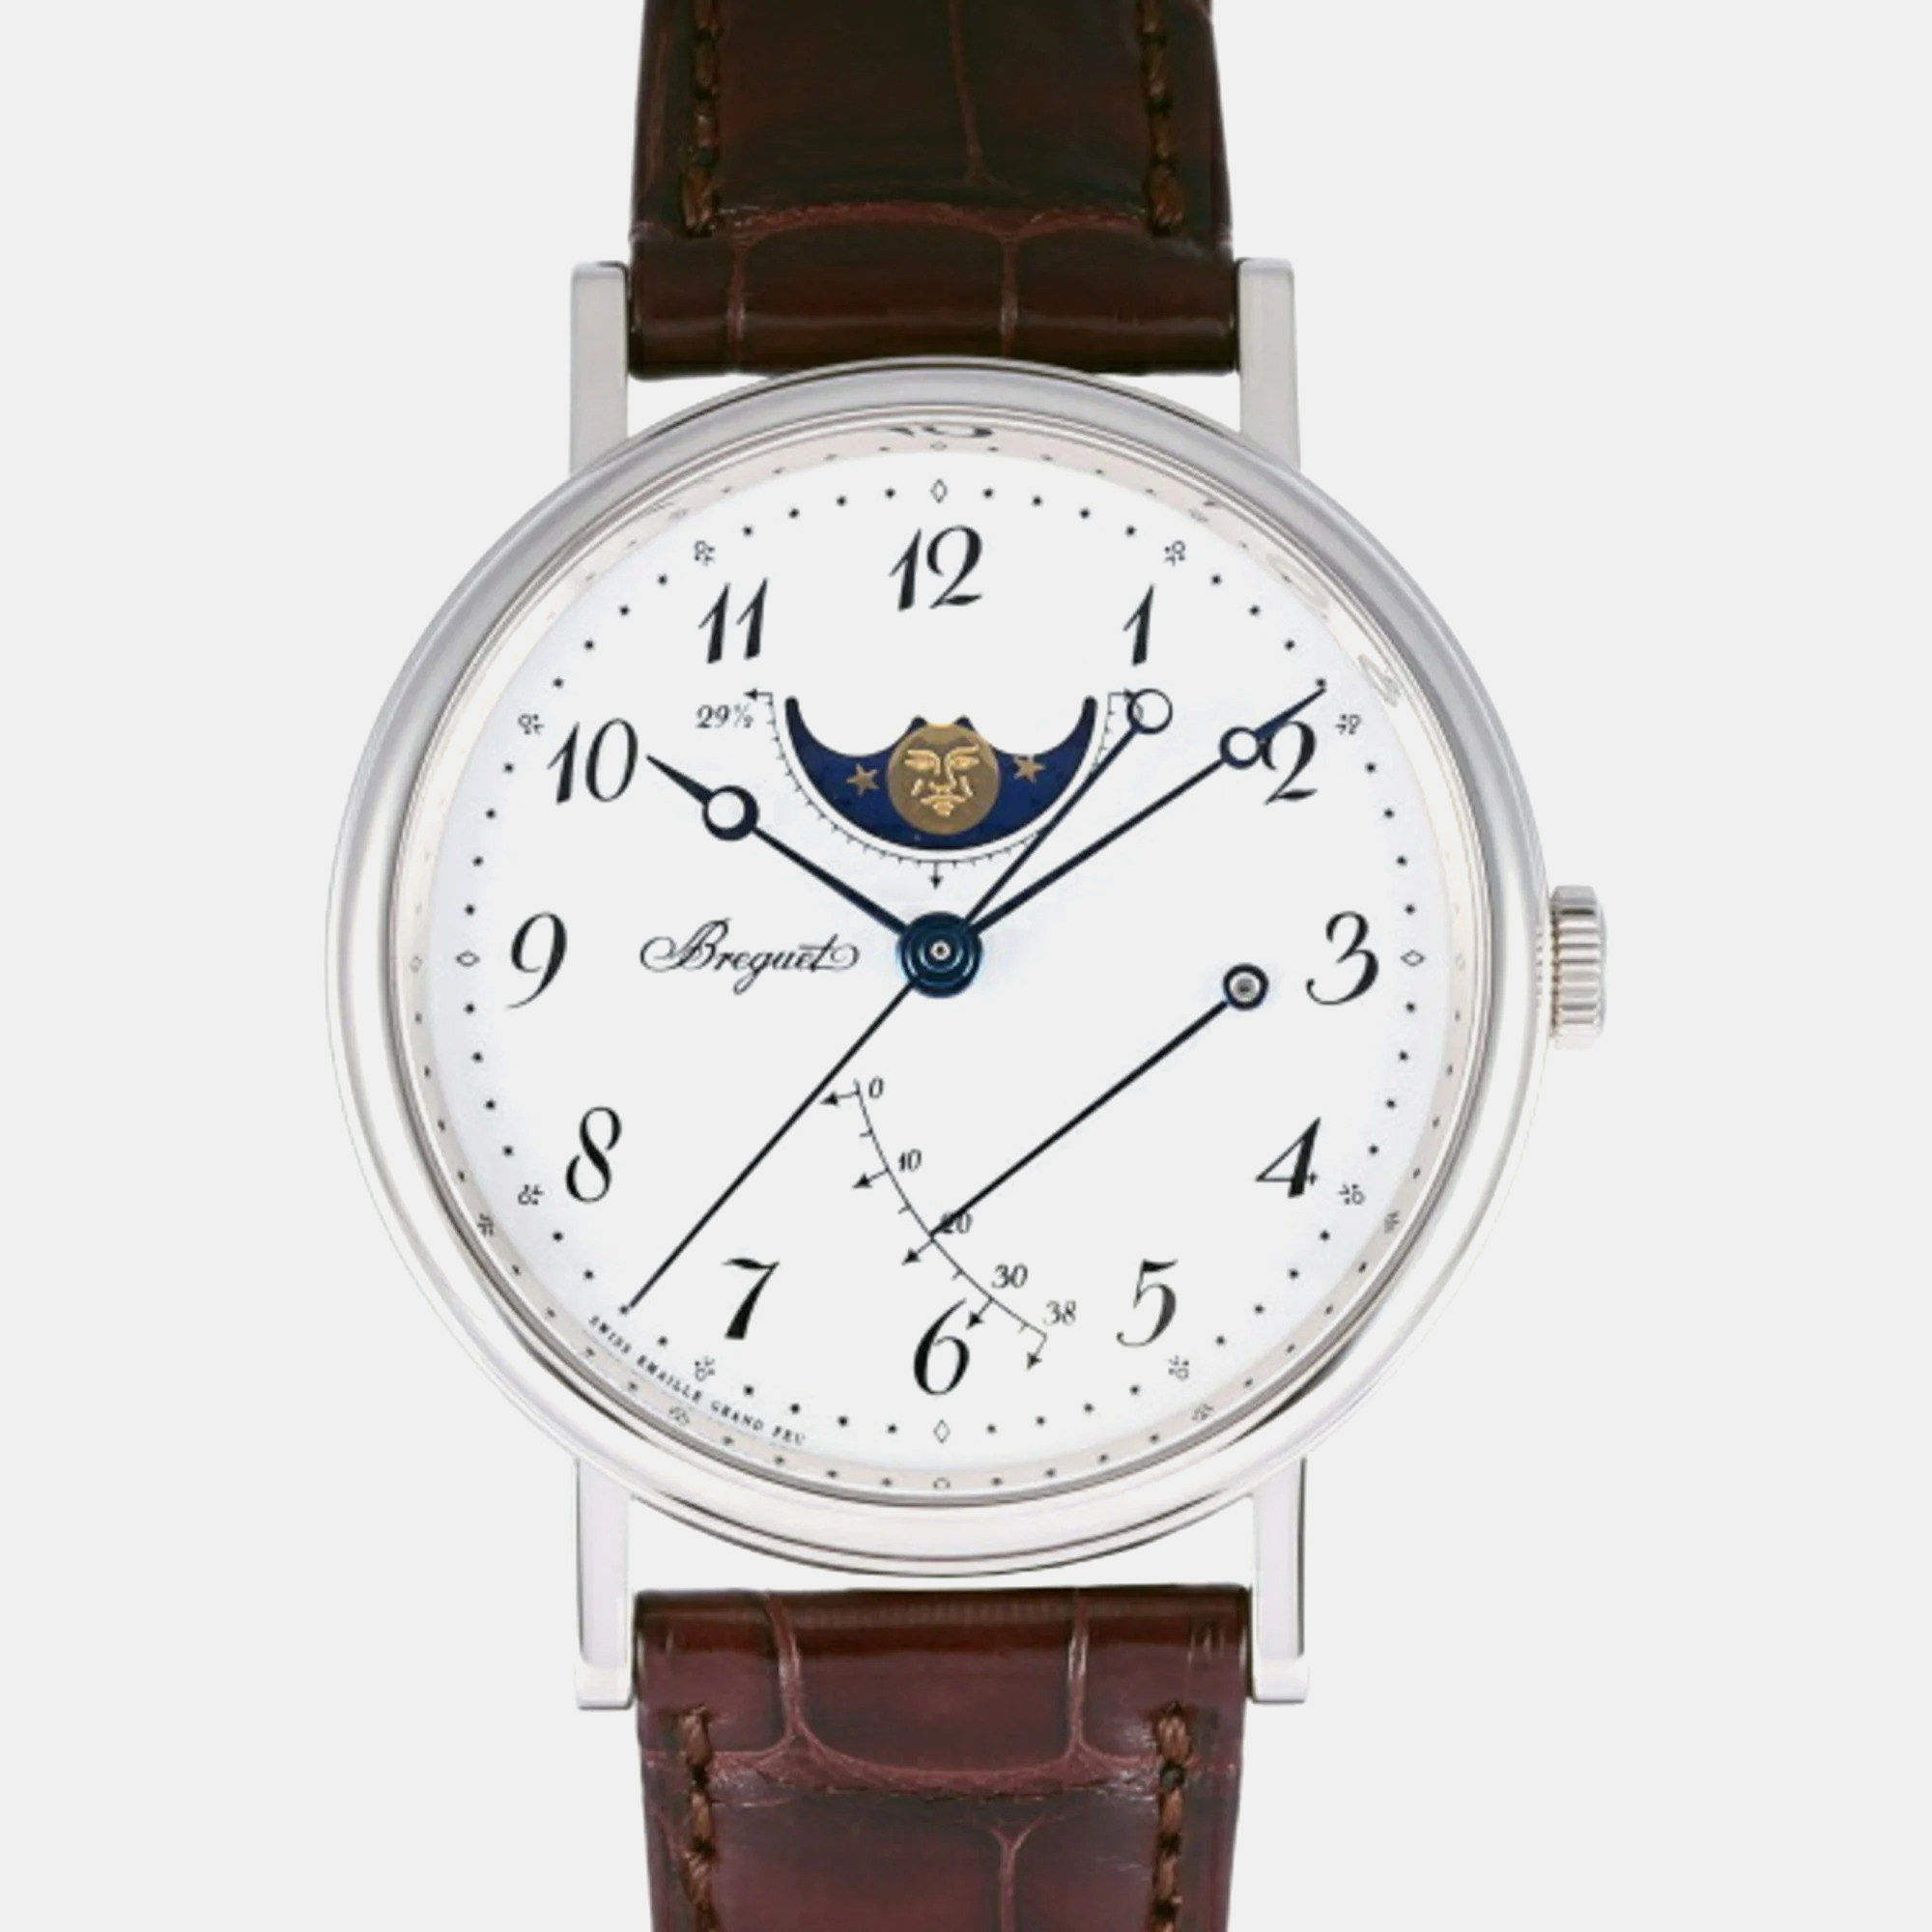 A meticulously crafted watch holds the promise of enduring appeal all day comfort and investment value. Carefully assembled and finished to stand out on your wrist this Breguet timepiece is a purchase you will cherish.